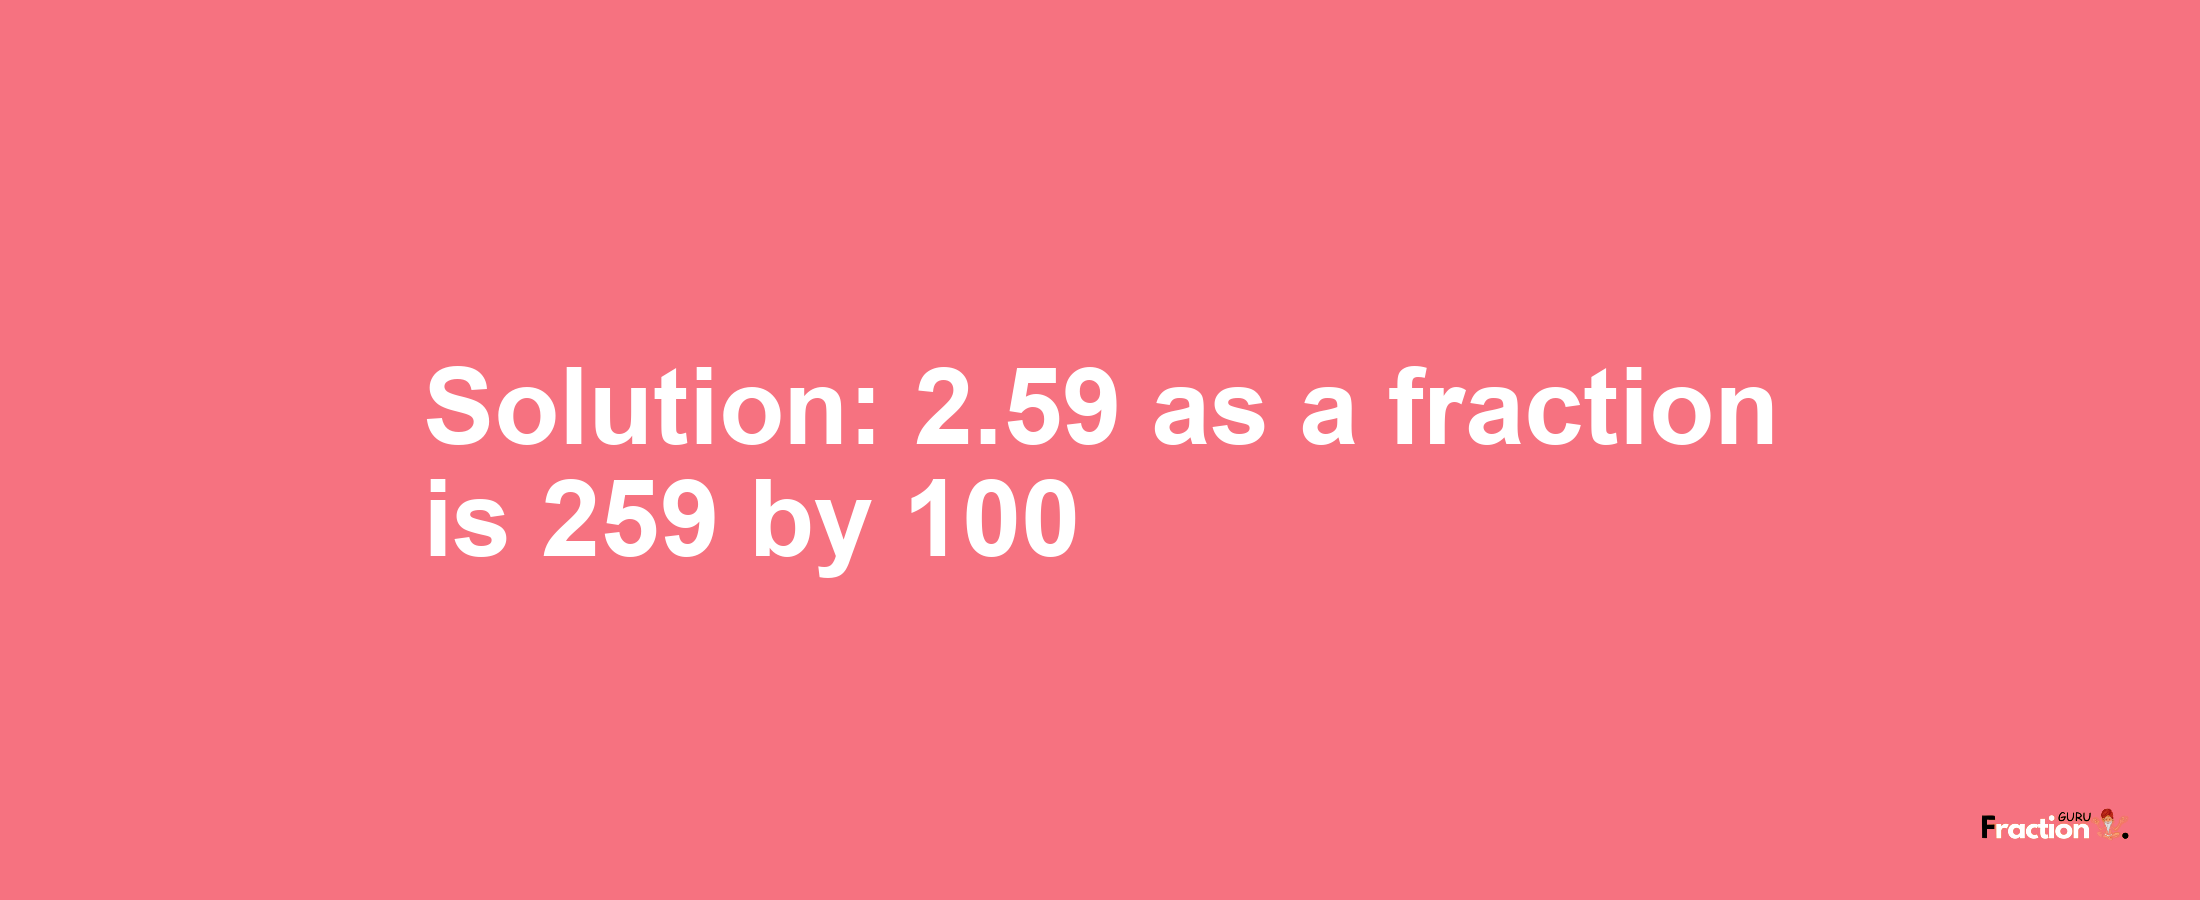 Solution:2.59 as a fraction is 259/100